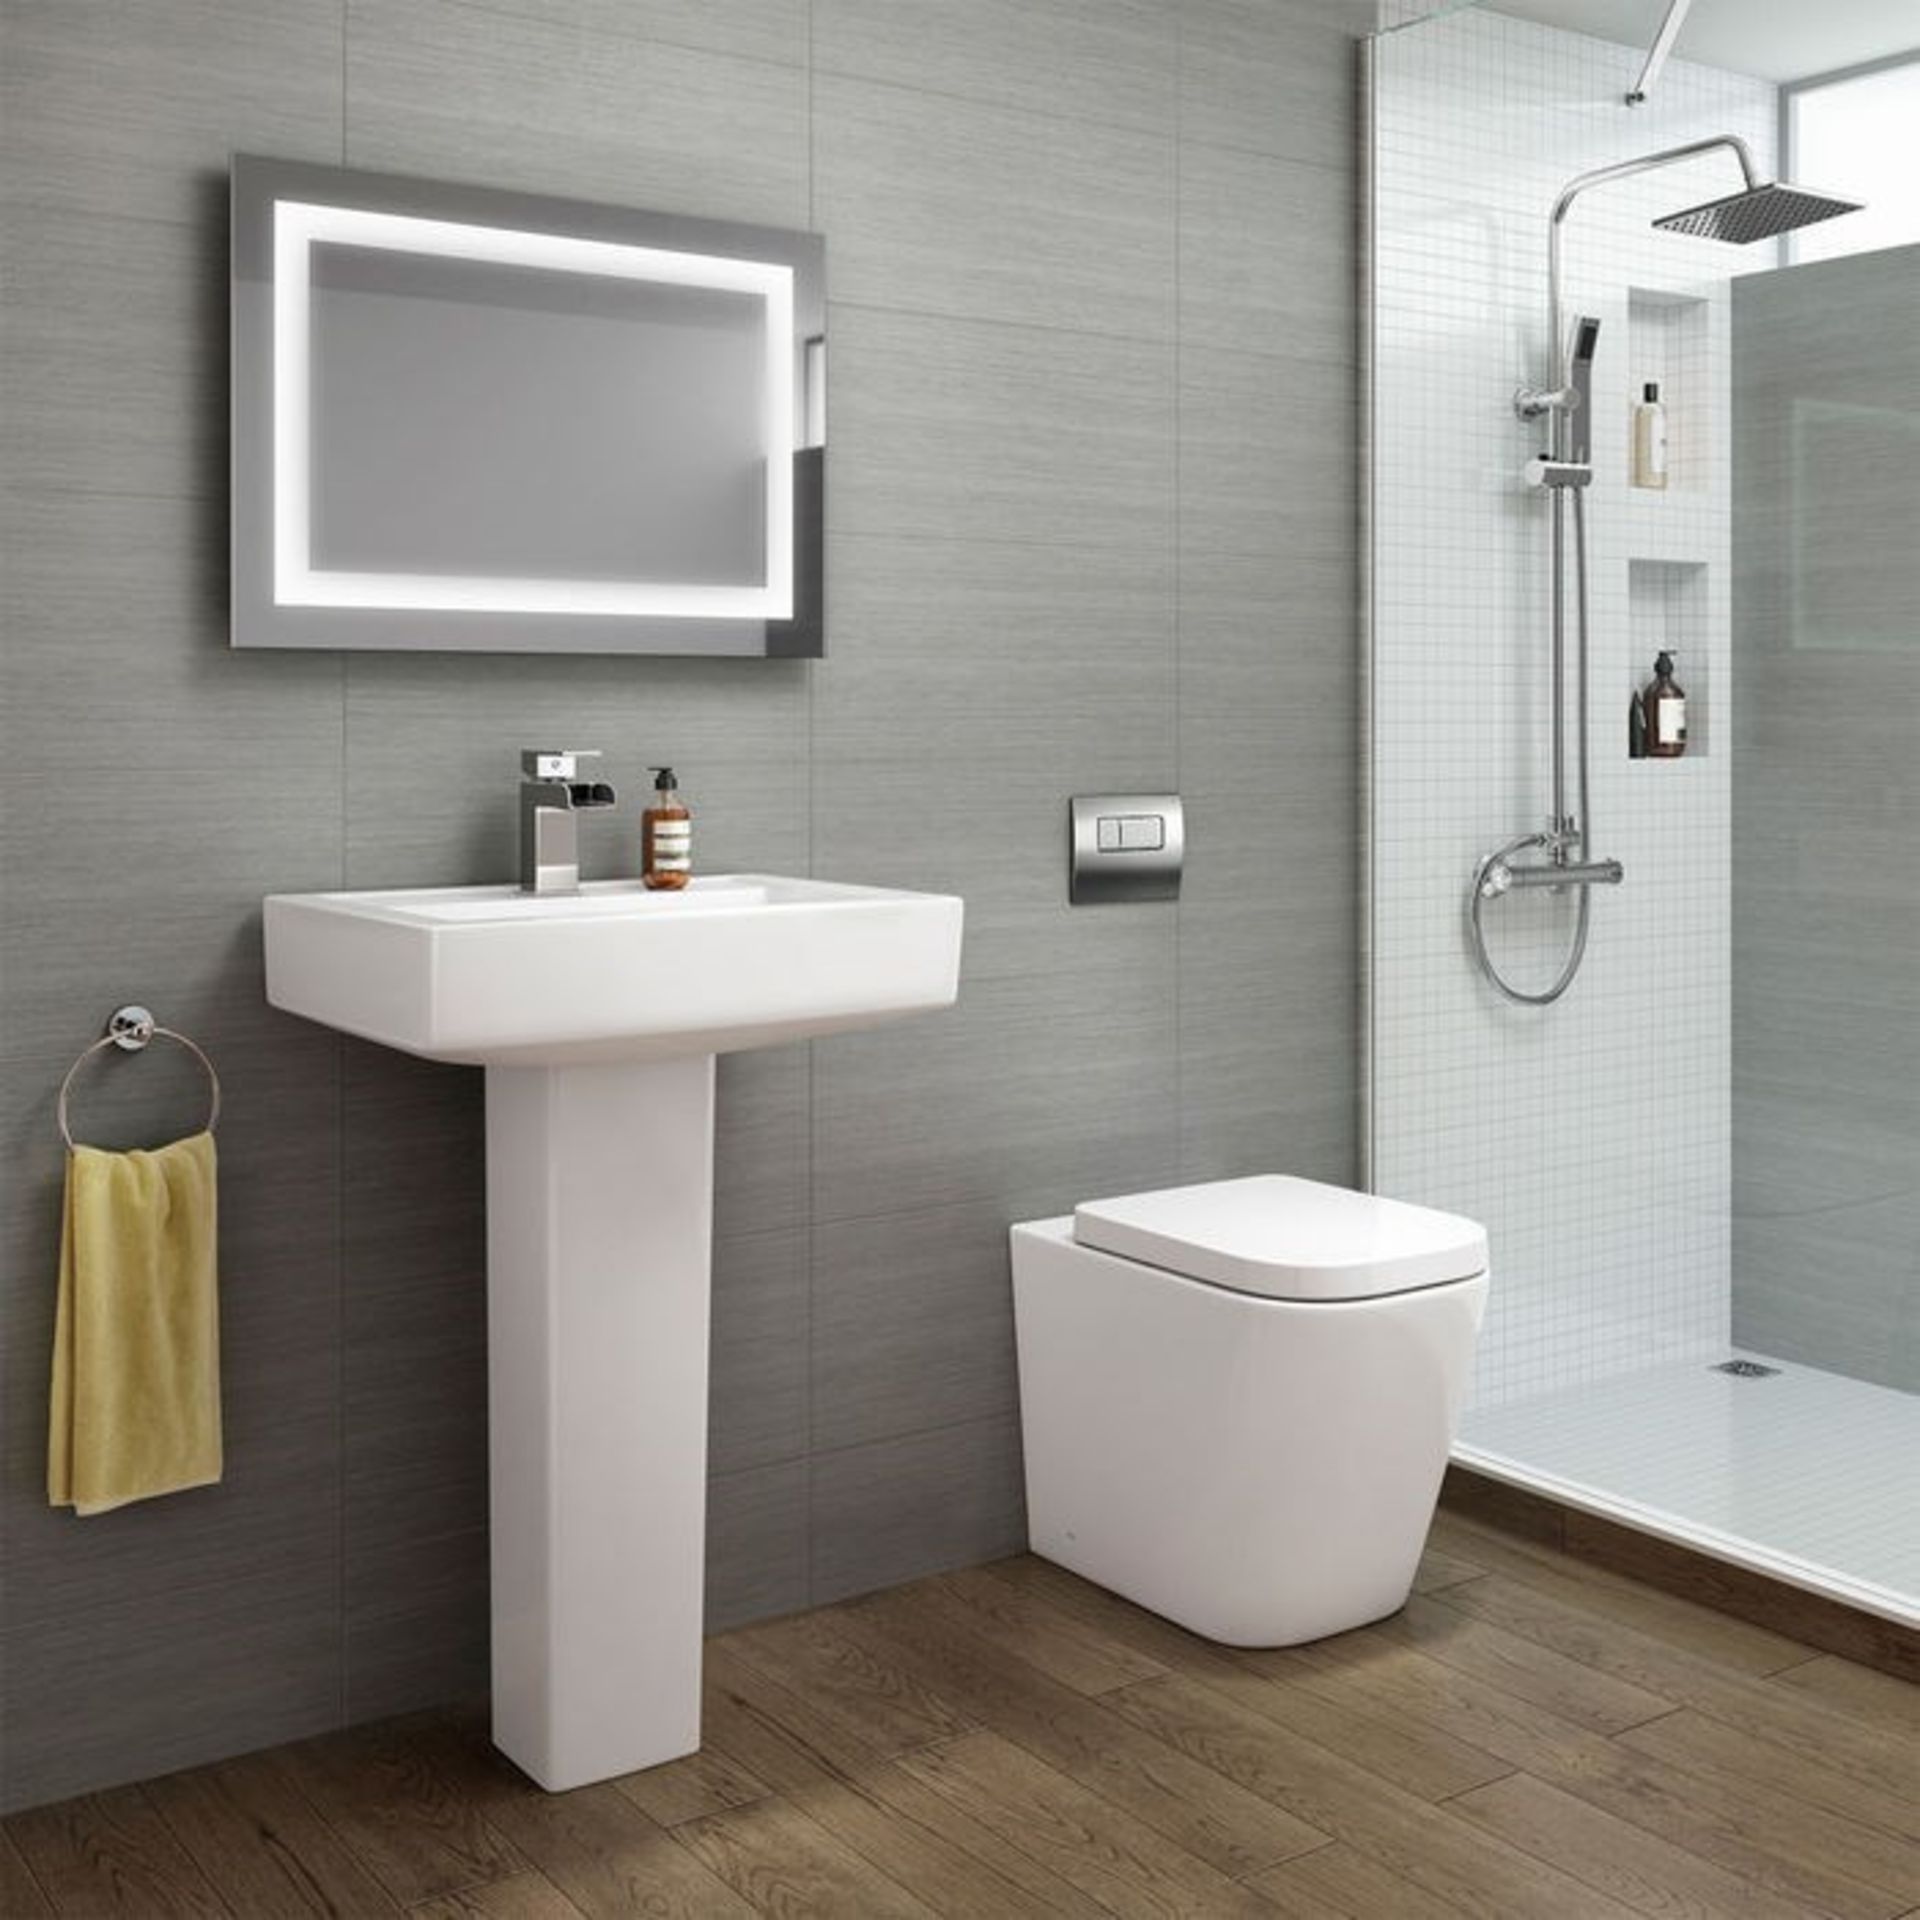 NEW & BOXED Florence Rimless Back to Wall Toilet inc Luxury Soft Close Seat.RRP £349.99 each.R... - Image 2 of 3